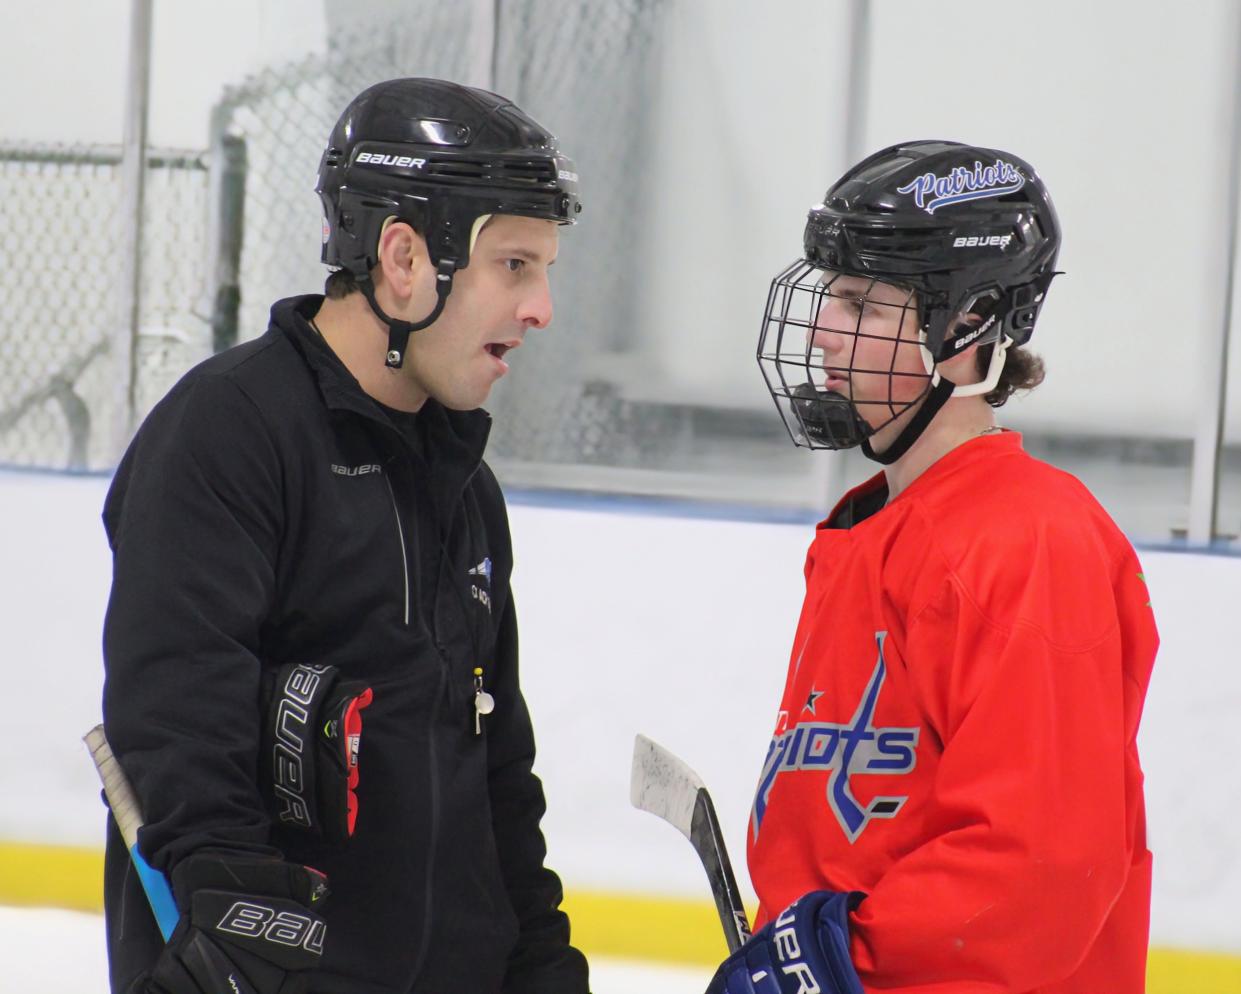 Olentangy Liberty interim coach Jonathon Falvo talks with Brady Long during practice Tuesday at Chiller North. Liberty plays St. Charles in the regional final Saturday at OhioHealth Ice Haus.